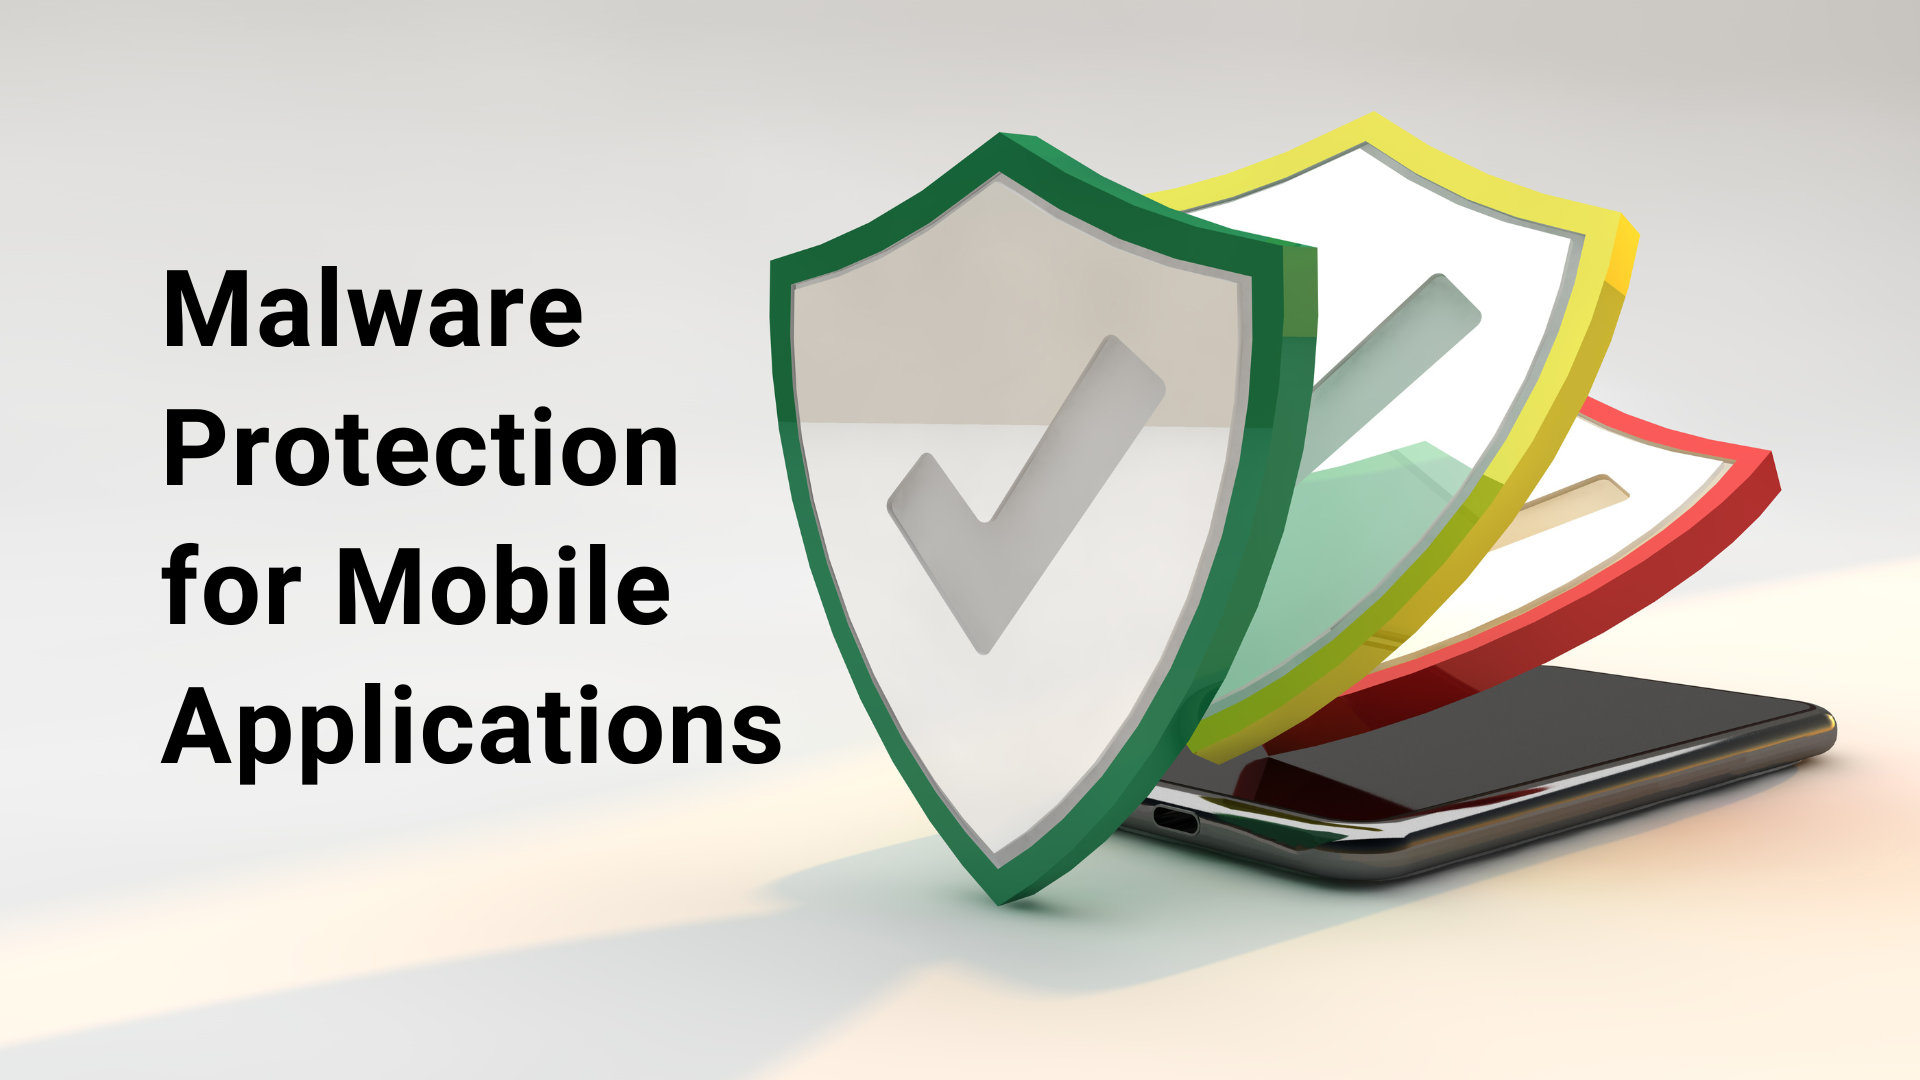 Malware Protection for Mobile Applications